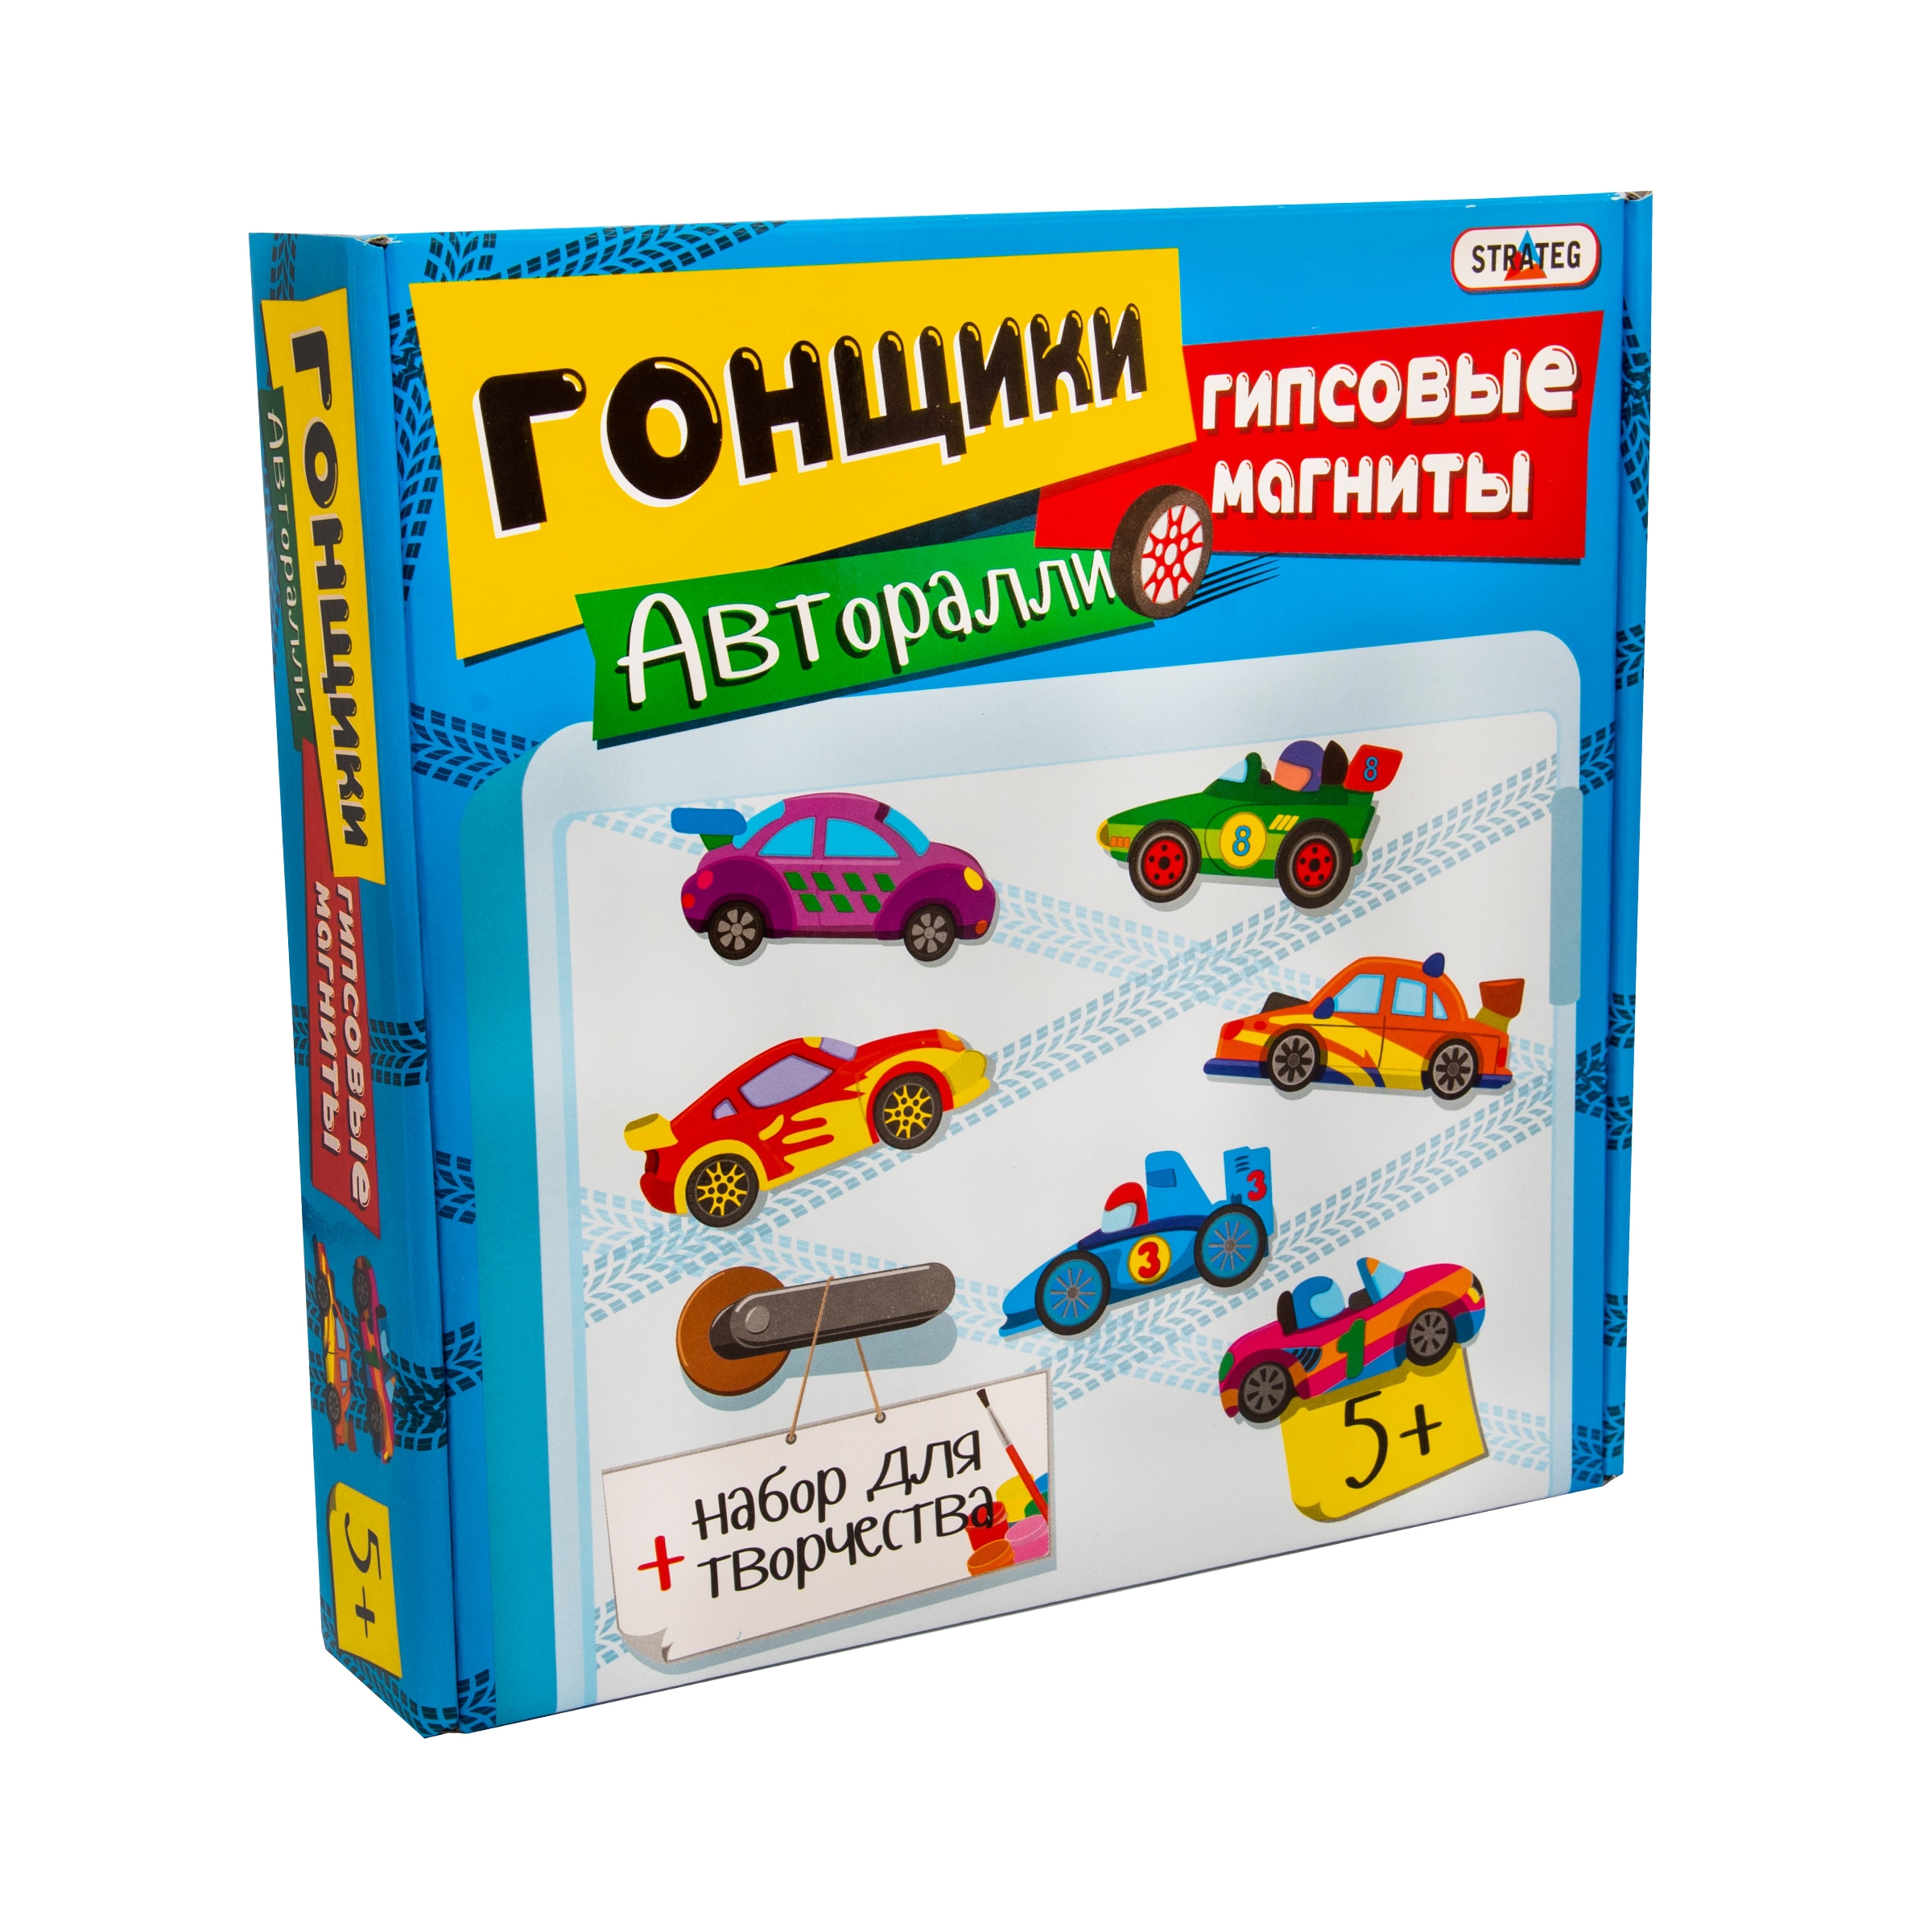 Set for creativity "Gypsum magnets - racers" (rus.) (225)